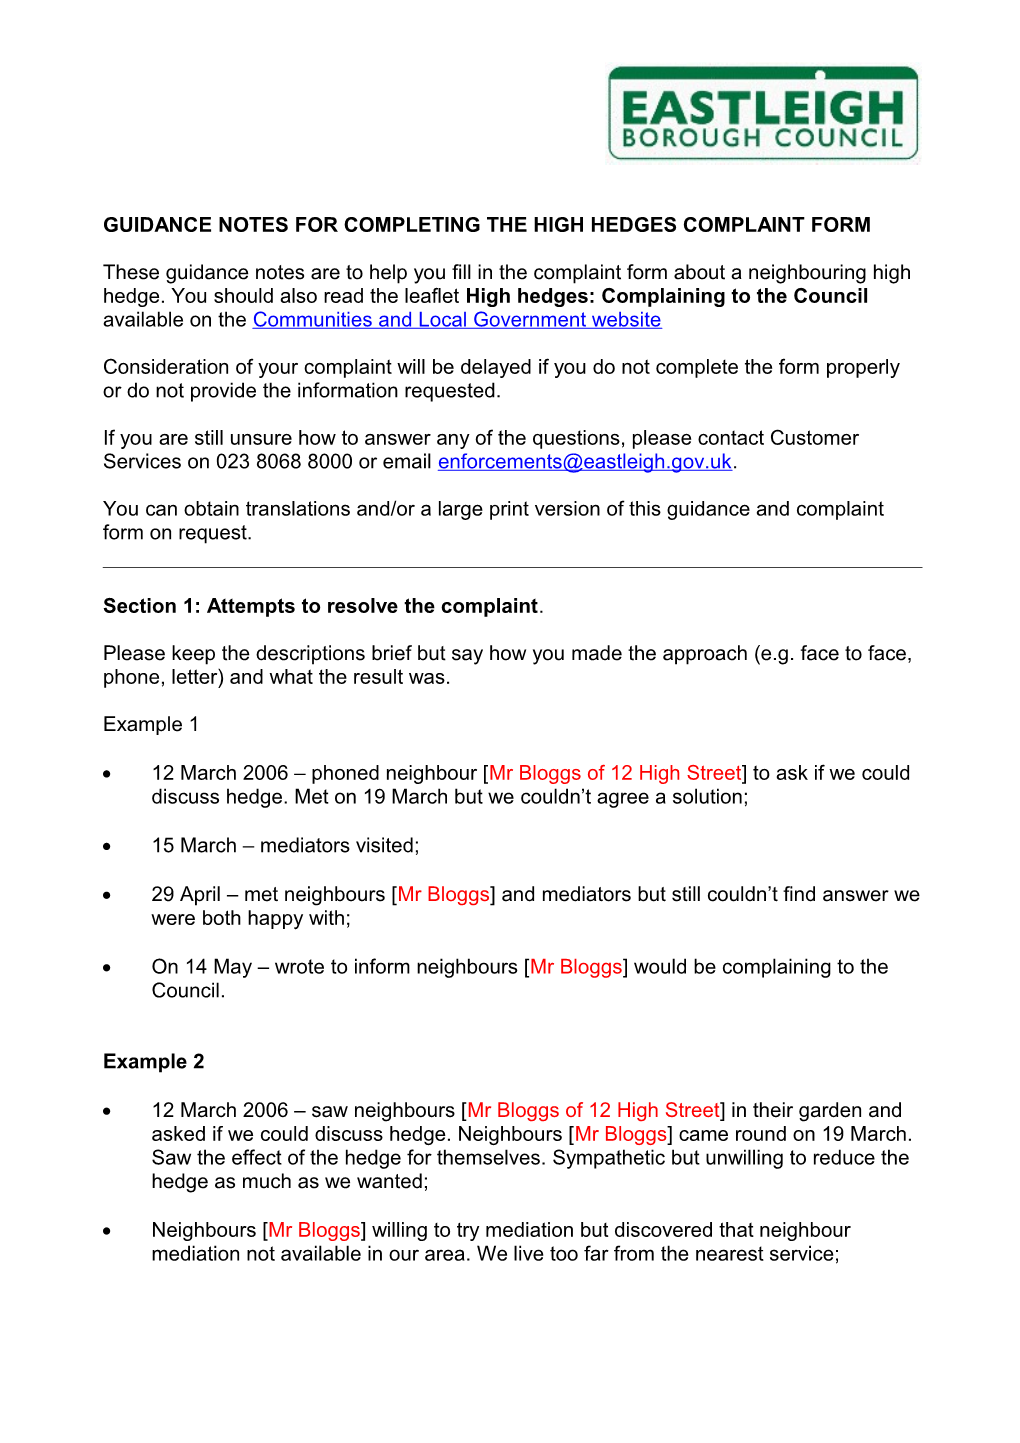 Guidance Notes for Completing the Complaint Form